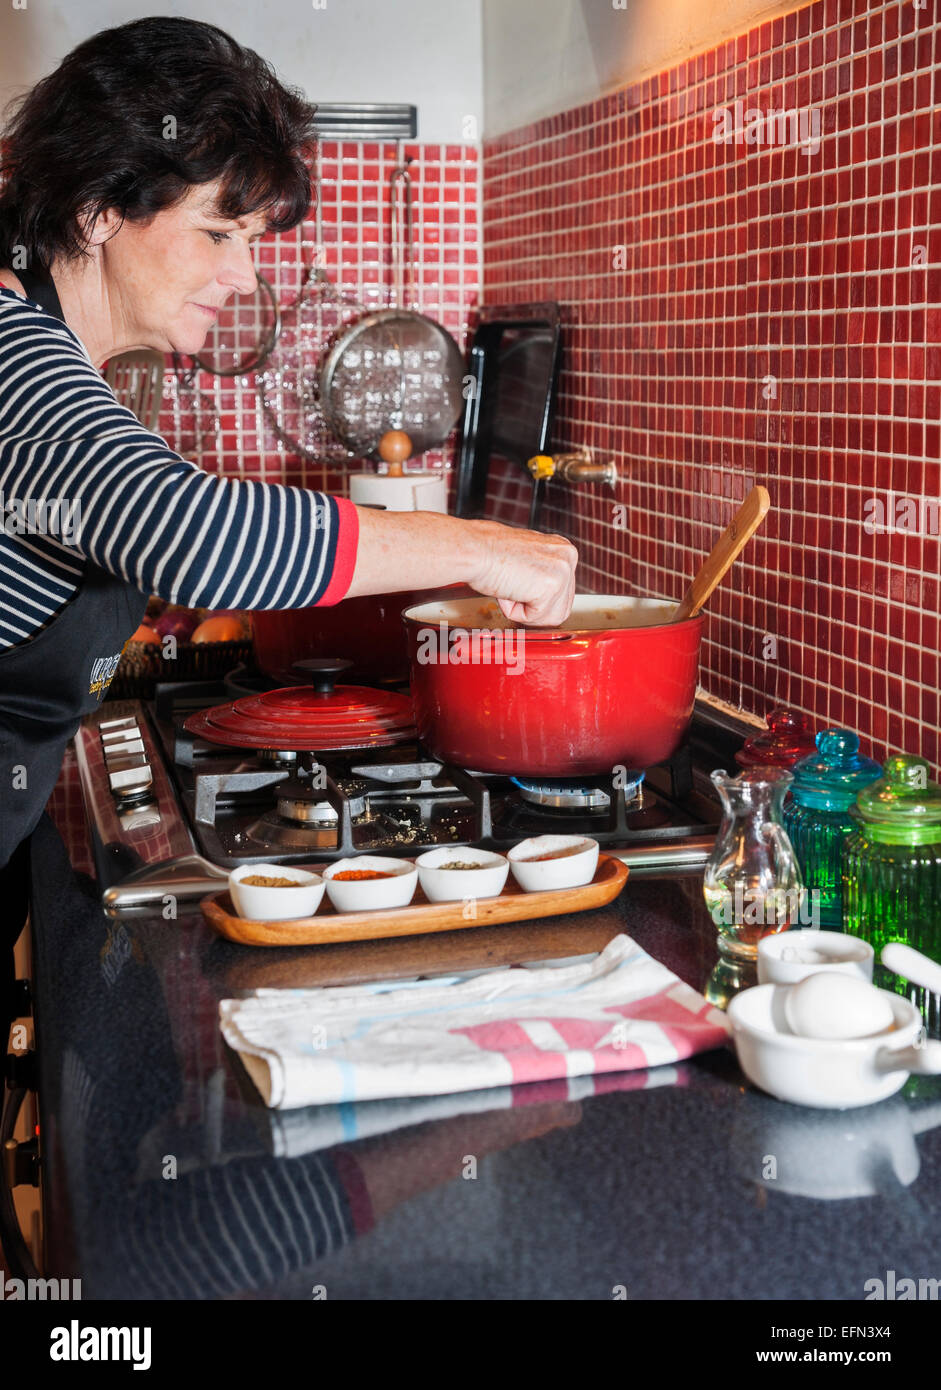 Woman stirring a red pot on the stove during a cooking class, Bellavista district, Santiago, Chile, South America Stock Photo